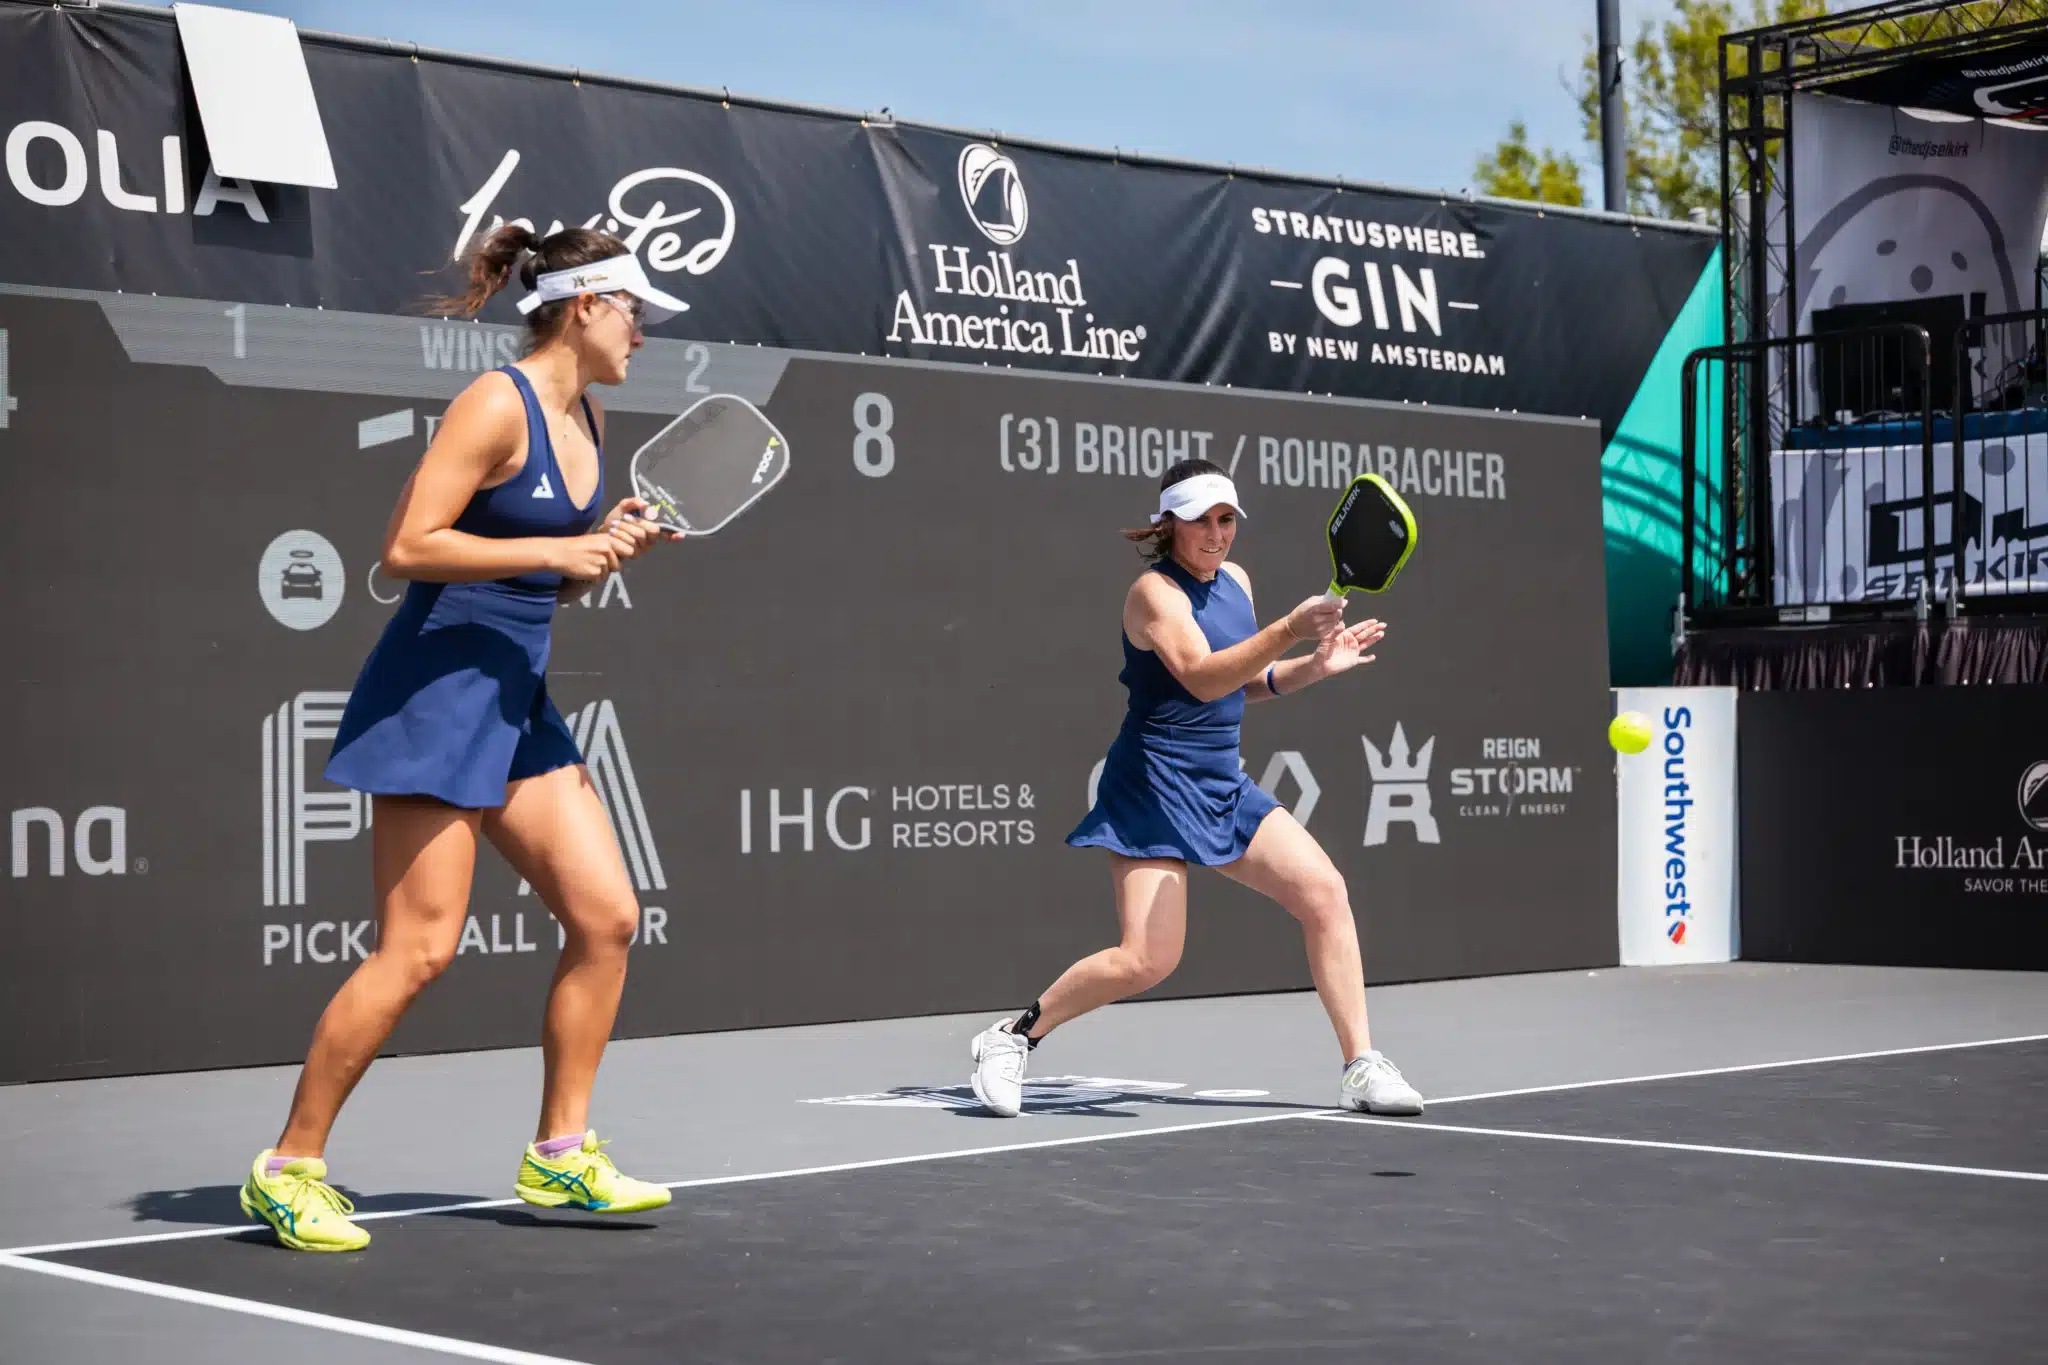 How to serve in pickleball